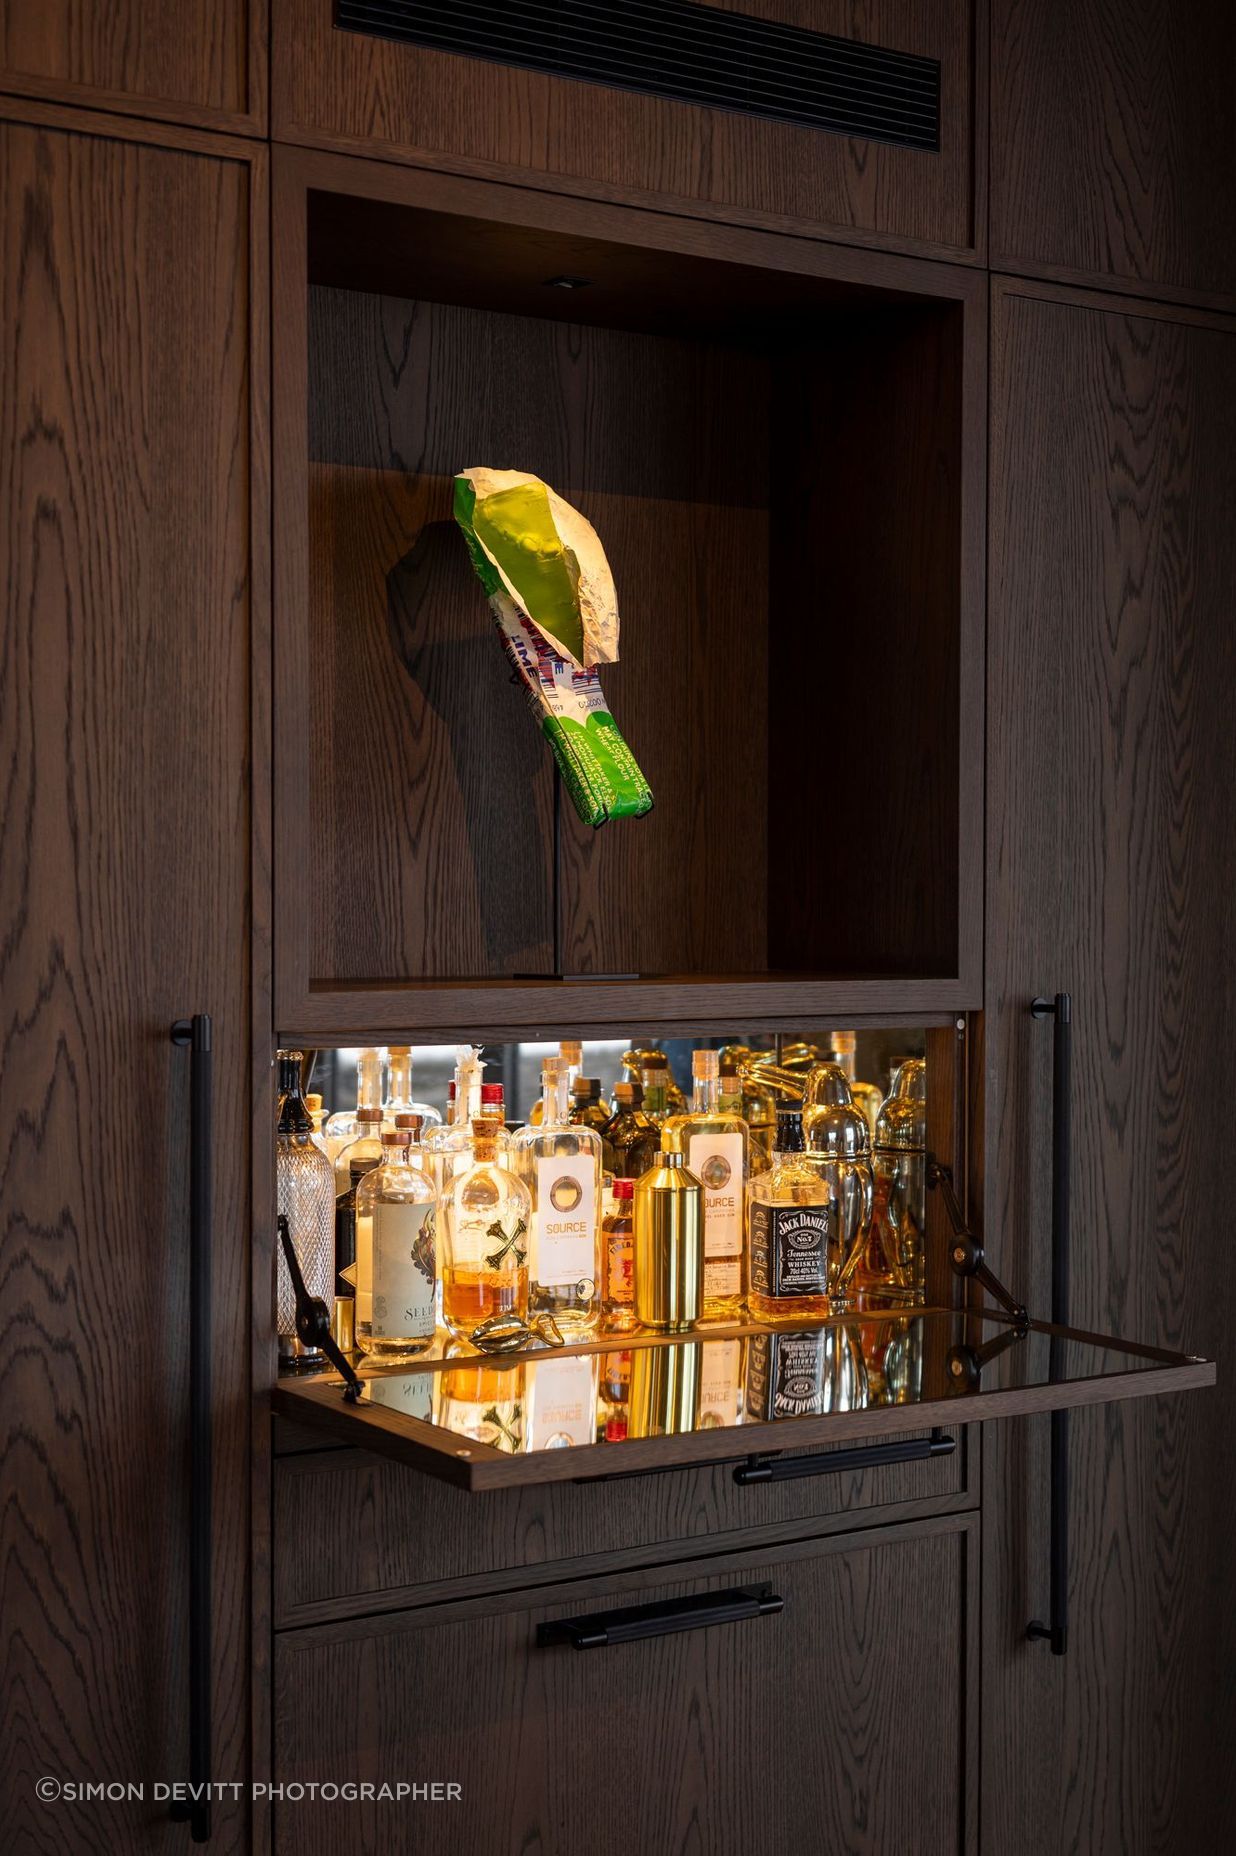 A mini-bar concealed in the kitchen cabinetry. The homeowners are art collectors - the K Bar sculpture is by Simon Lewis Wards.